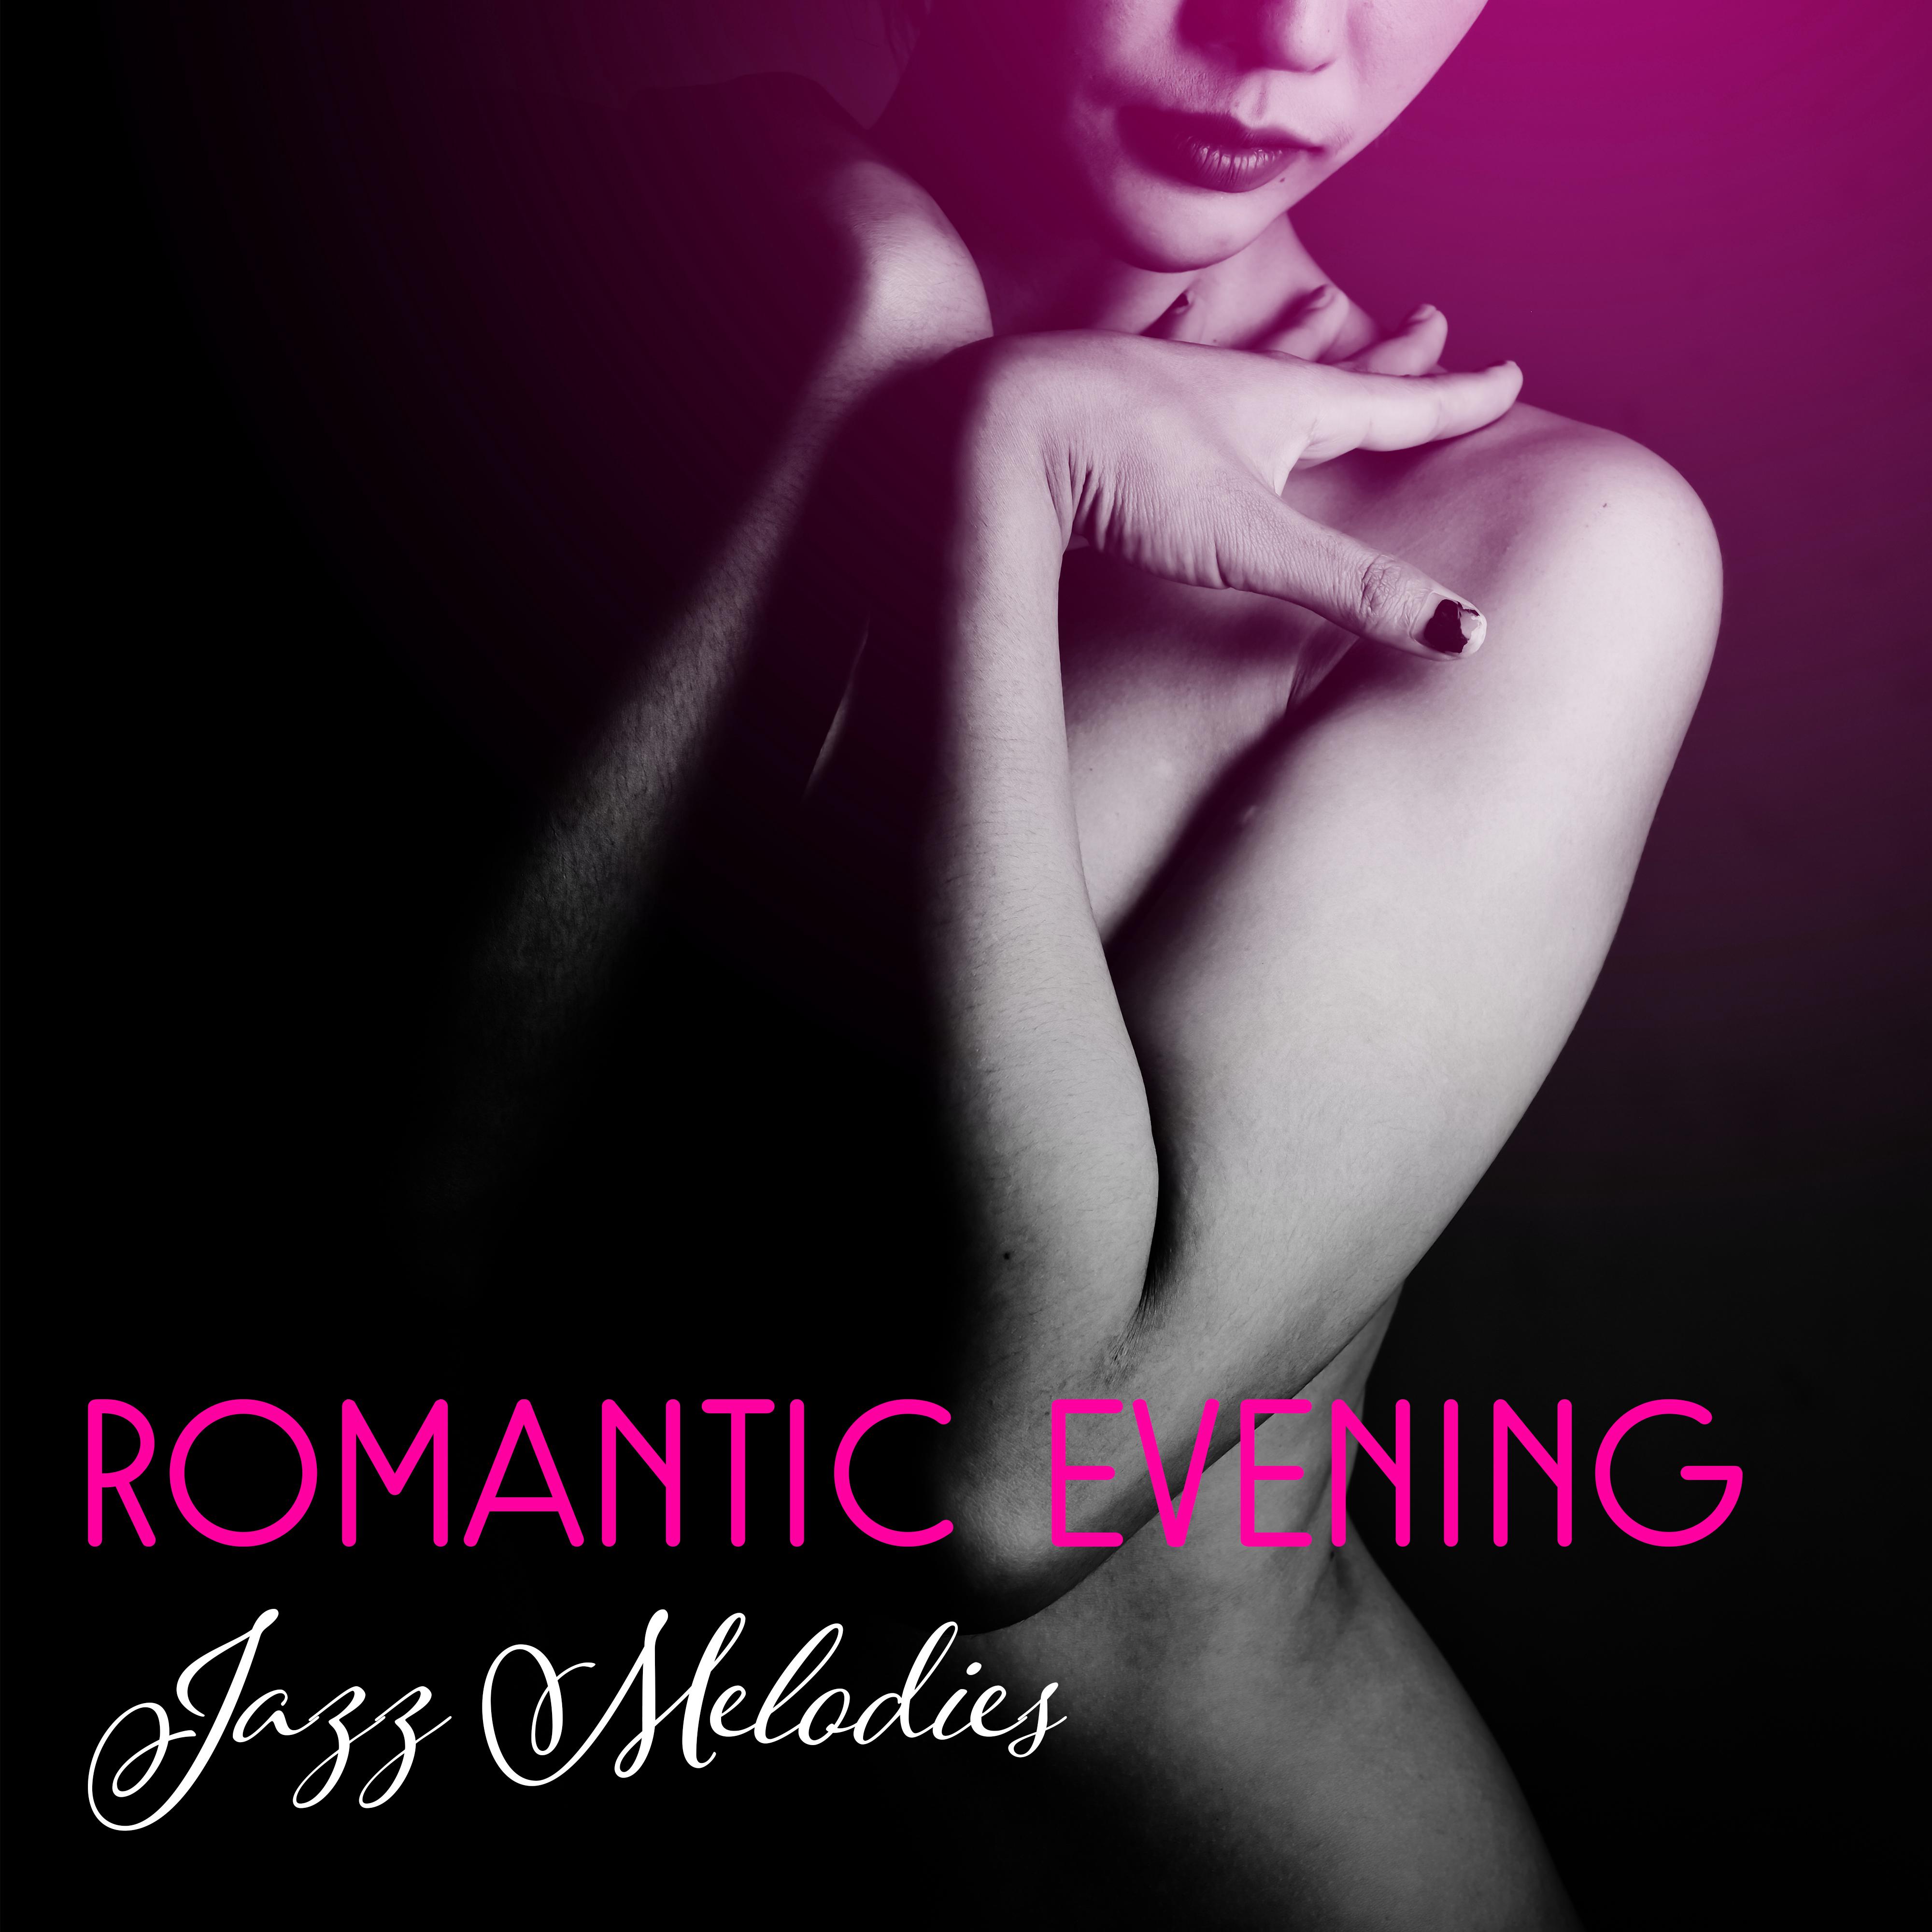 Romantic Evening Jazz Melodies  Soothing Jazz Music for Lovers, Erotic Massage, Jazz Sounds for Evening Time